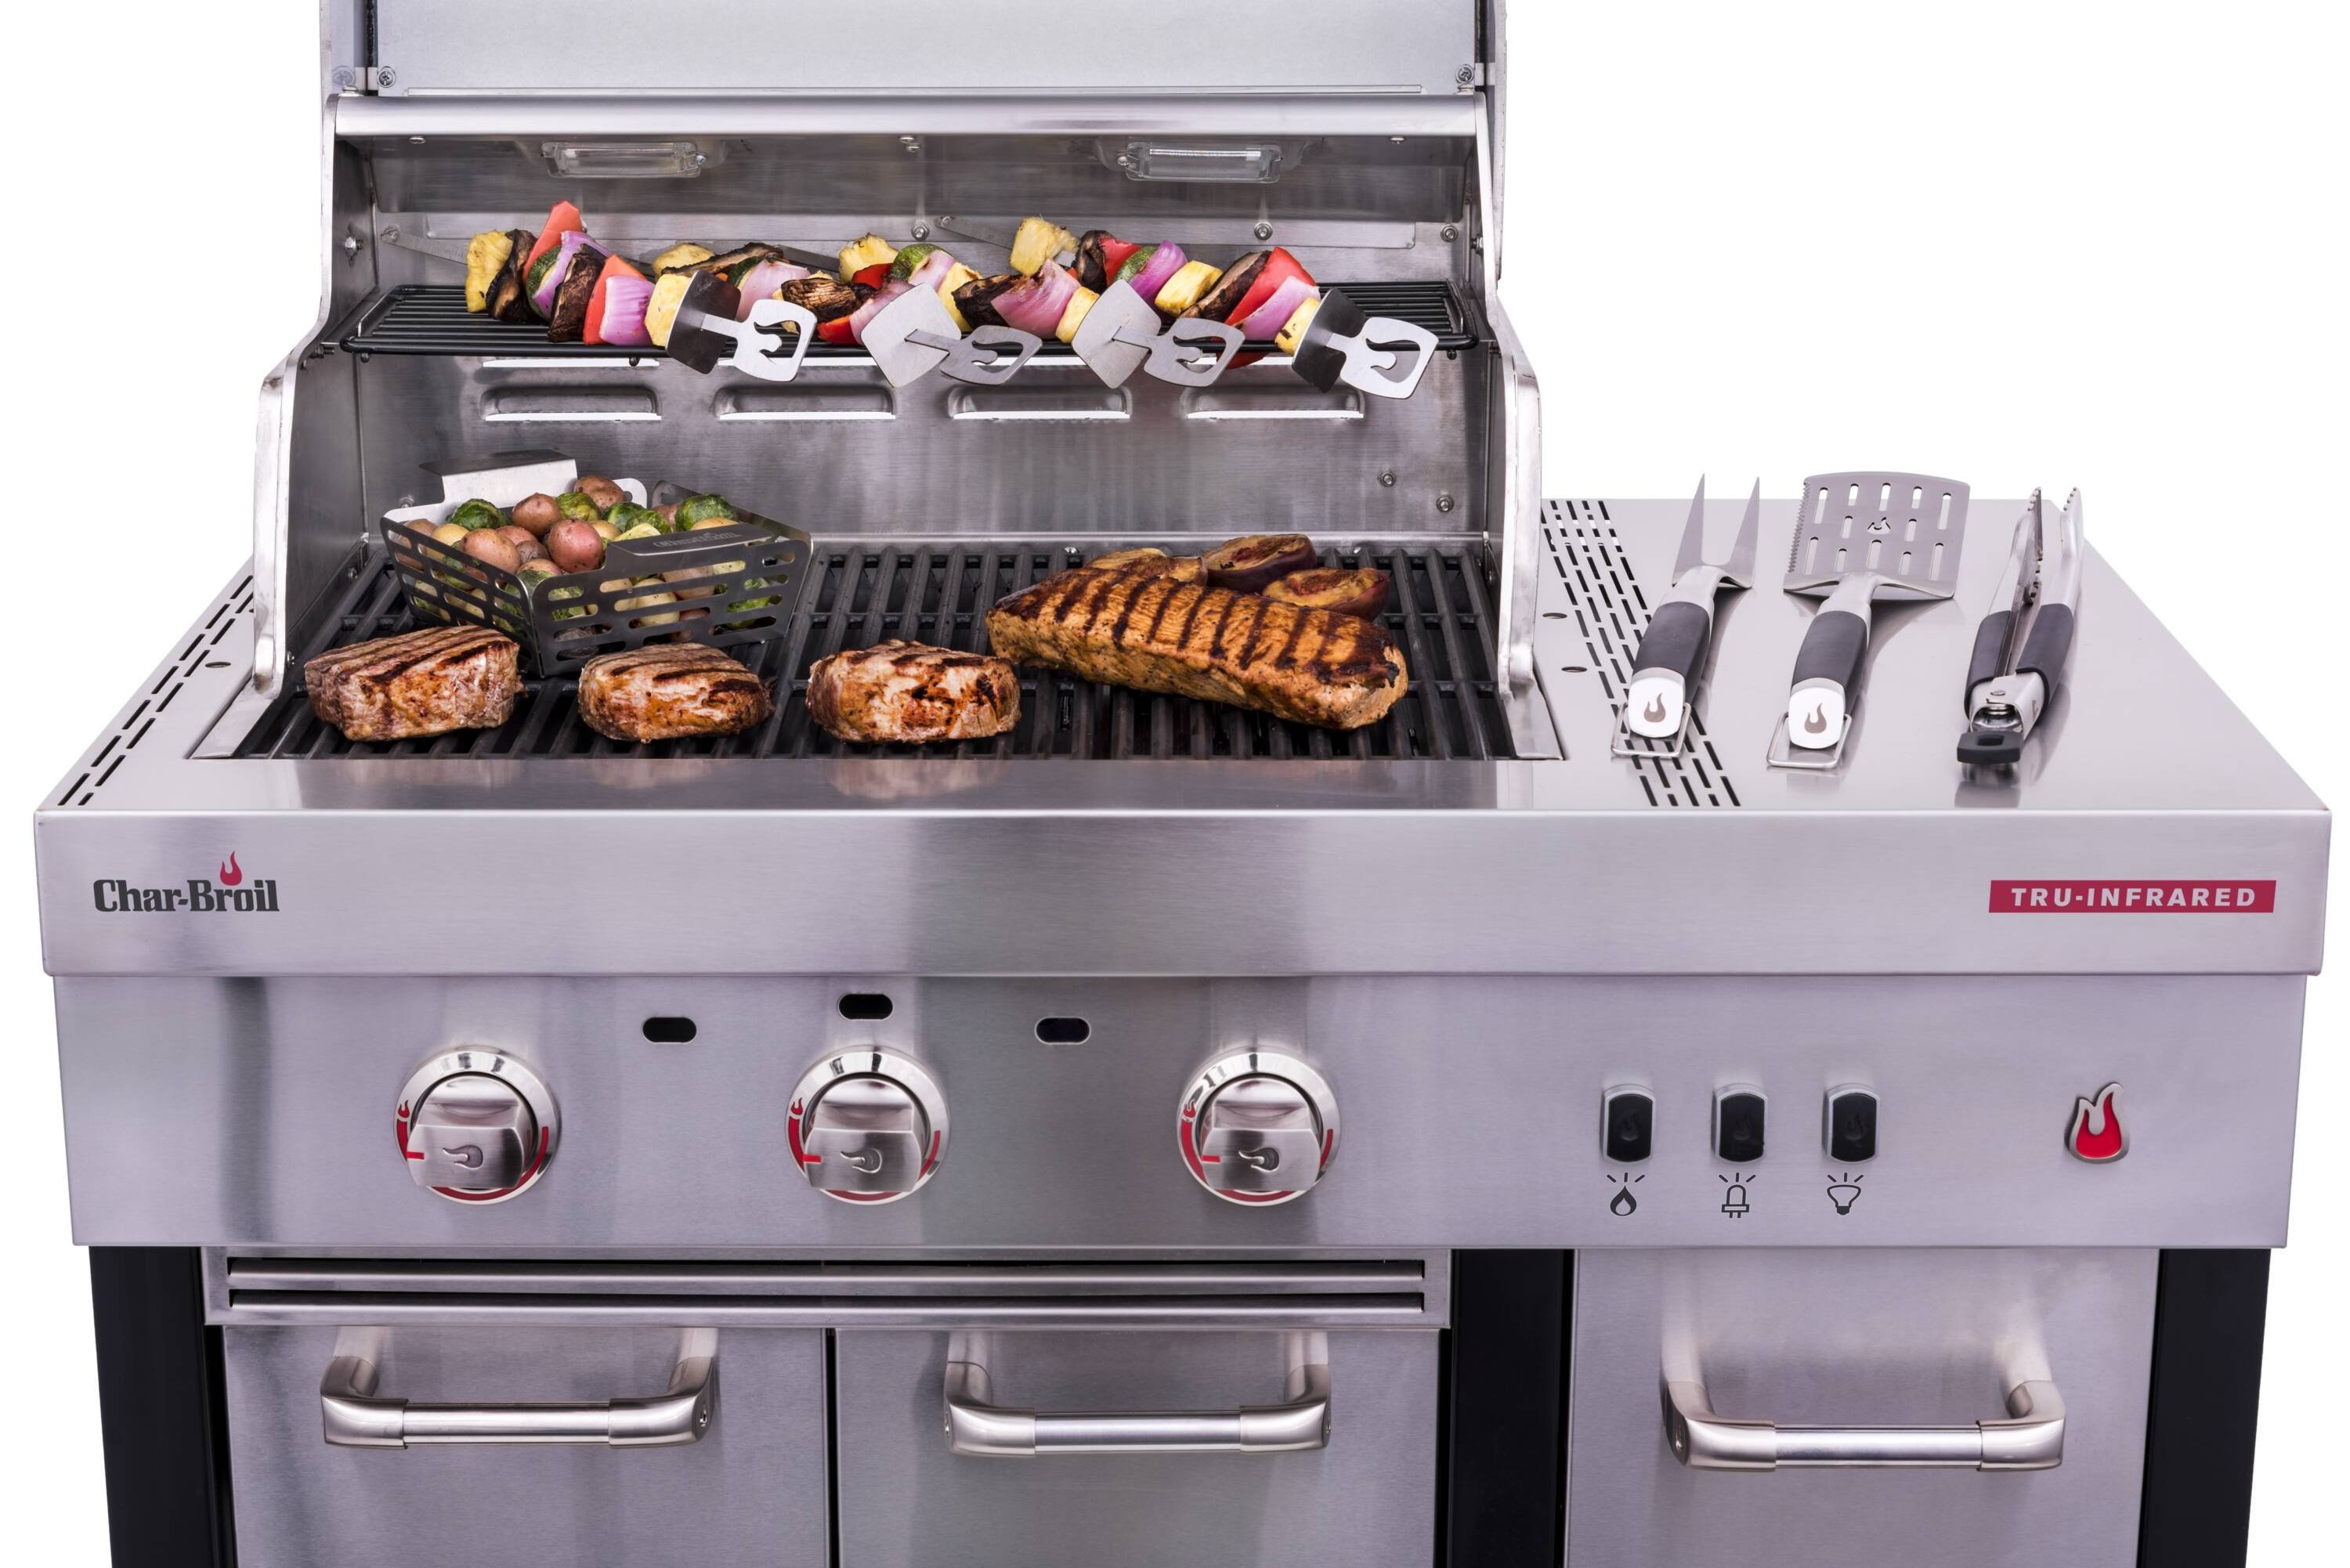 JDBLGJD Portable Stove Top Grill Set Stainless Steel Barbecue BBQ Grill,Gas  Stove Top Grill,Indoor Kitchen BBQ Cooking Grates，With10pcs Barbecue